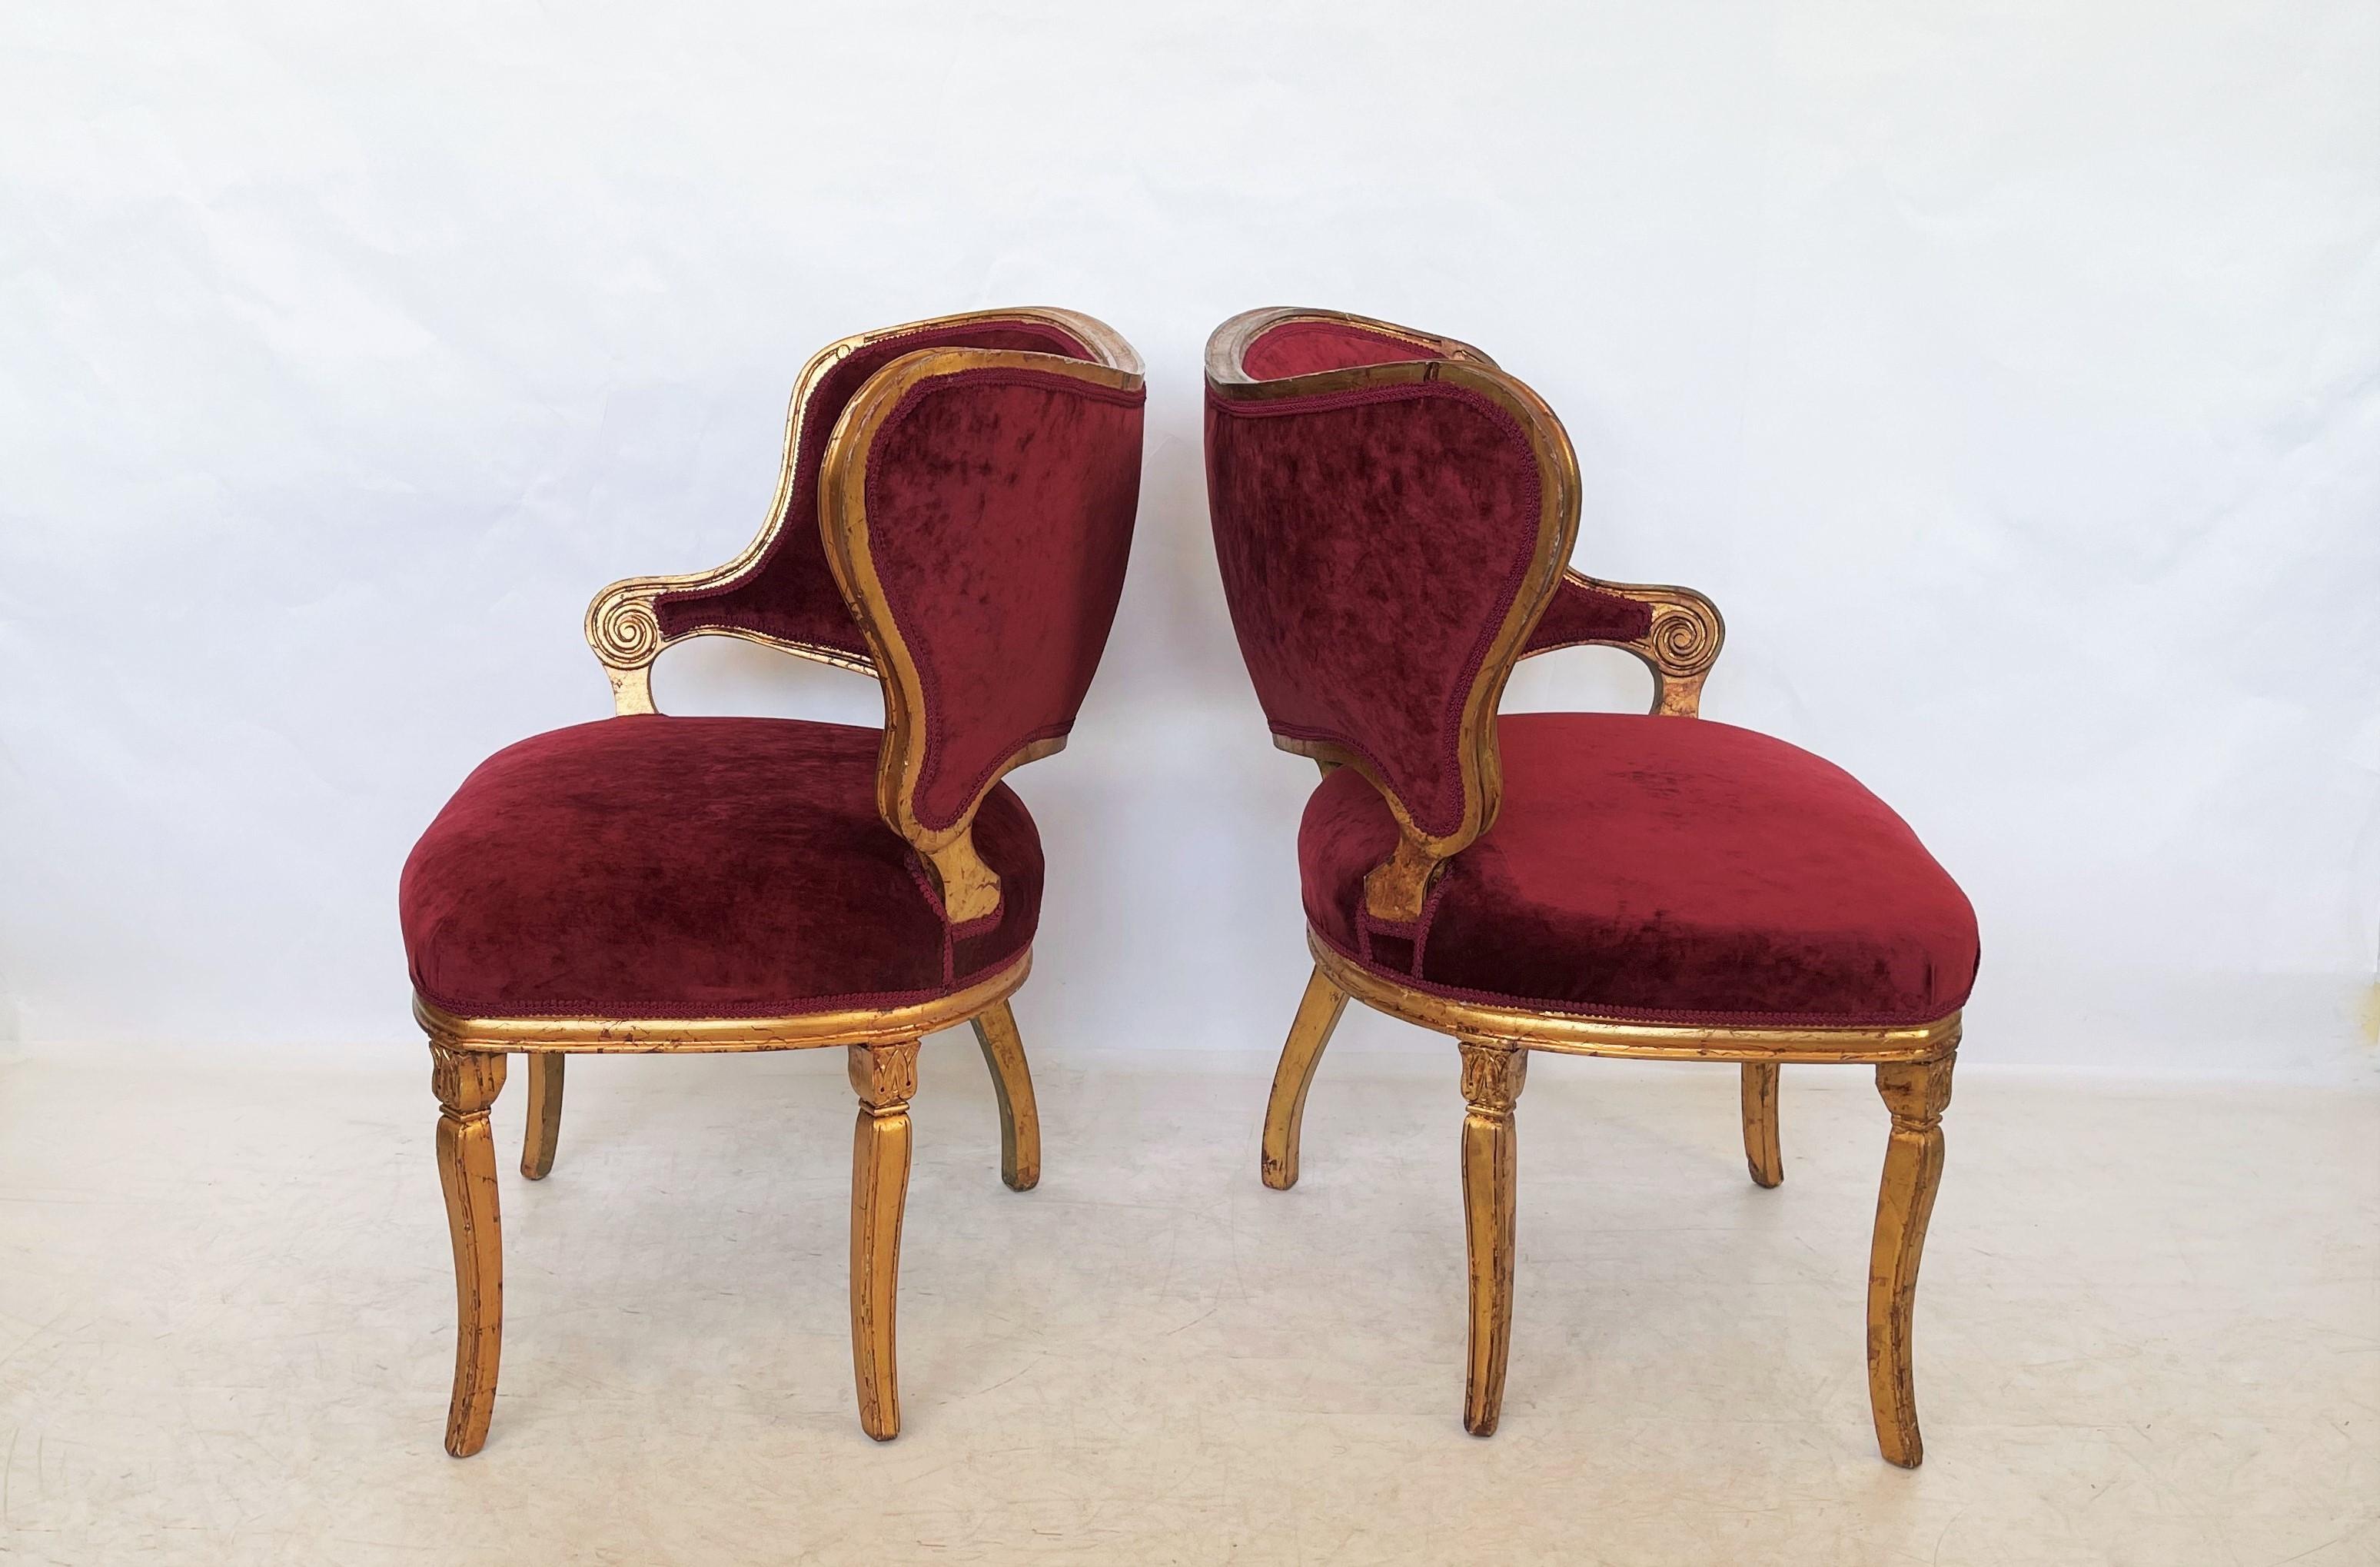 Gold Leaf Pair of Hollywood Regency Fireside Chairs Attributed to Grosfeld House For Sale